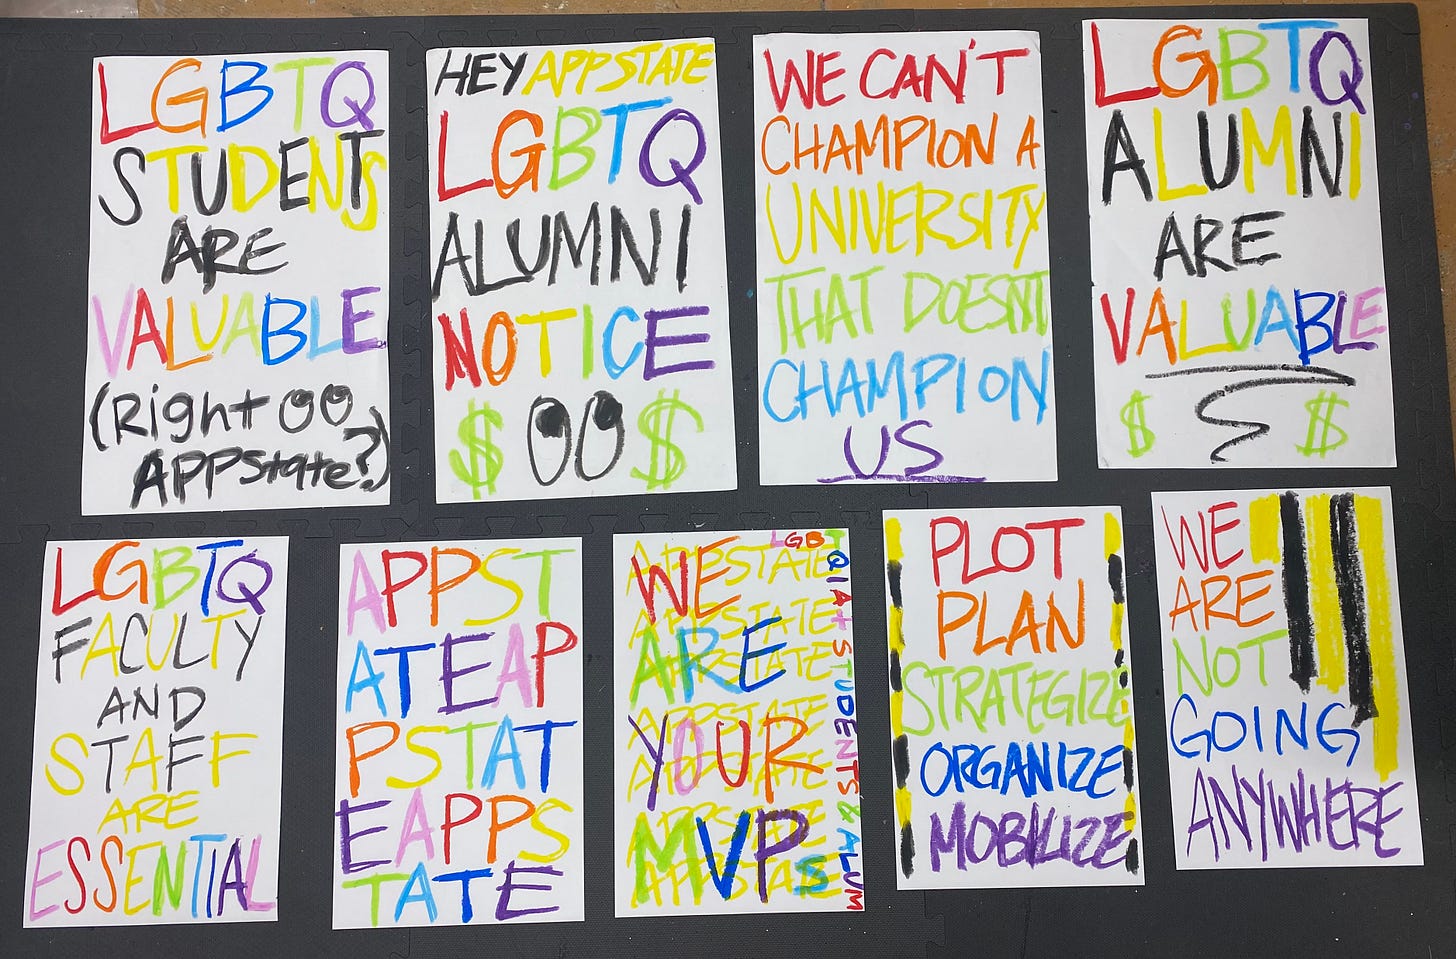 Several rainbow colored posters with different phrases on them such as "LGBTQ studetns are valuable" and "LGBTQ faculty and staff are essential".